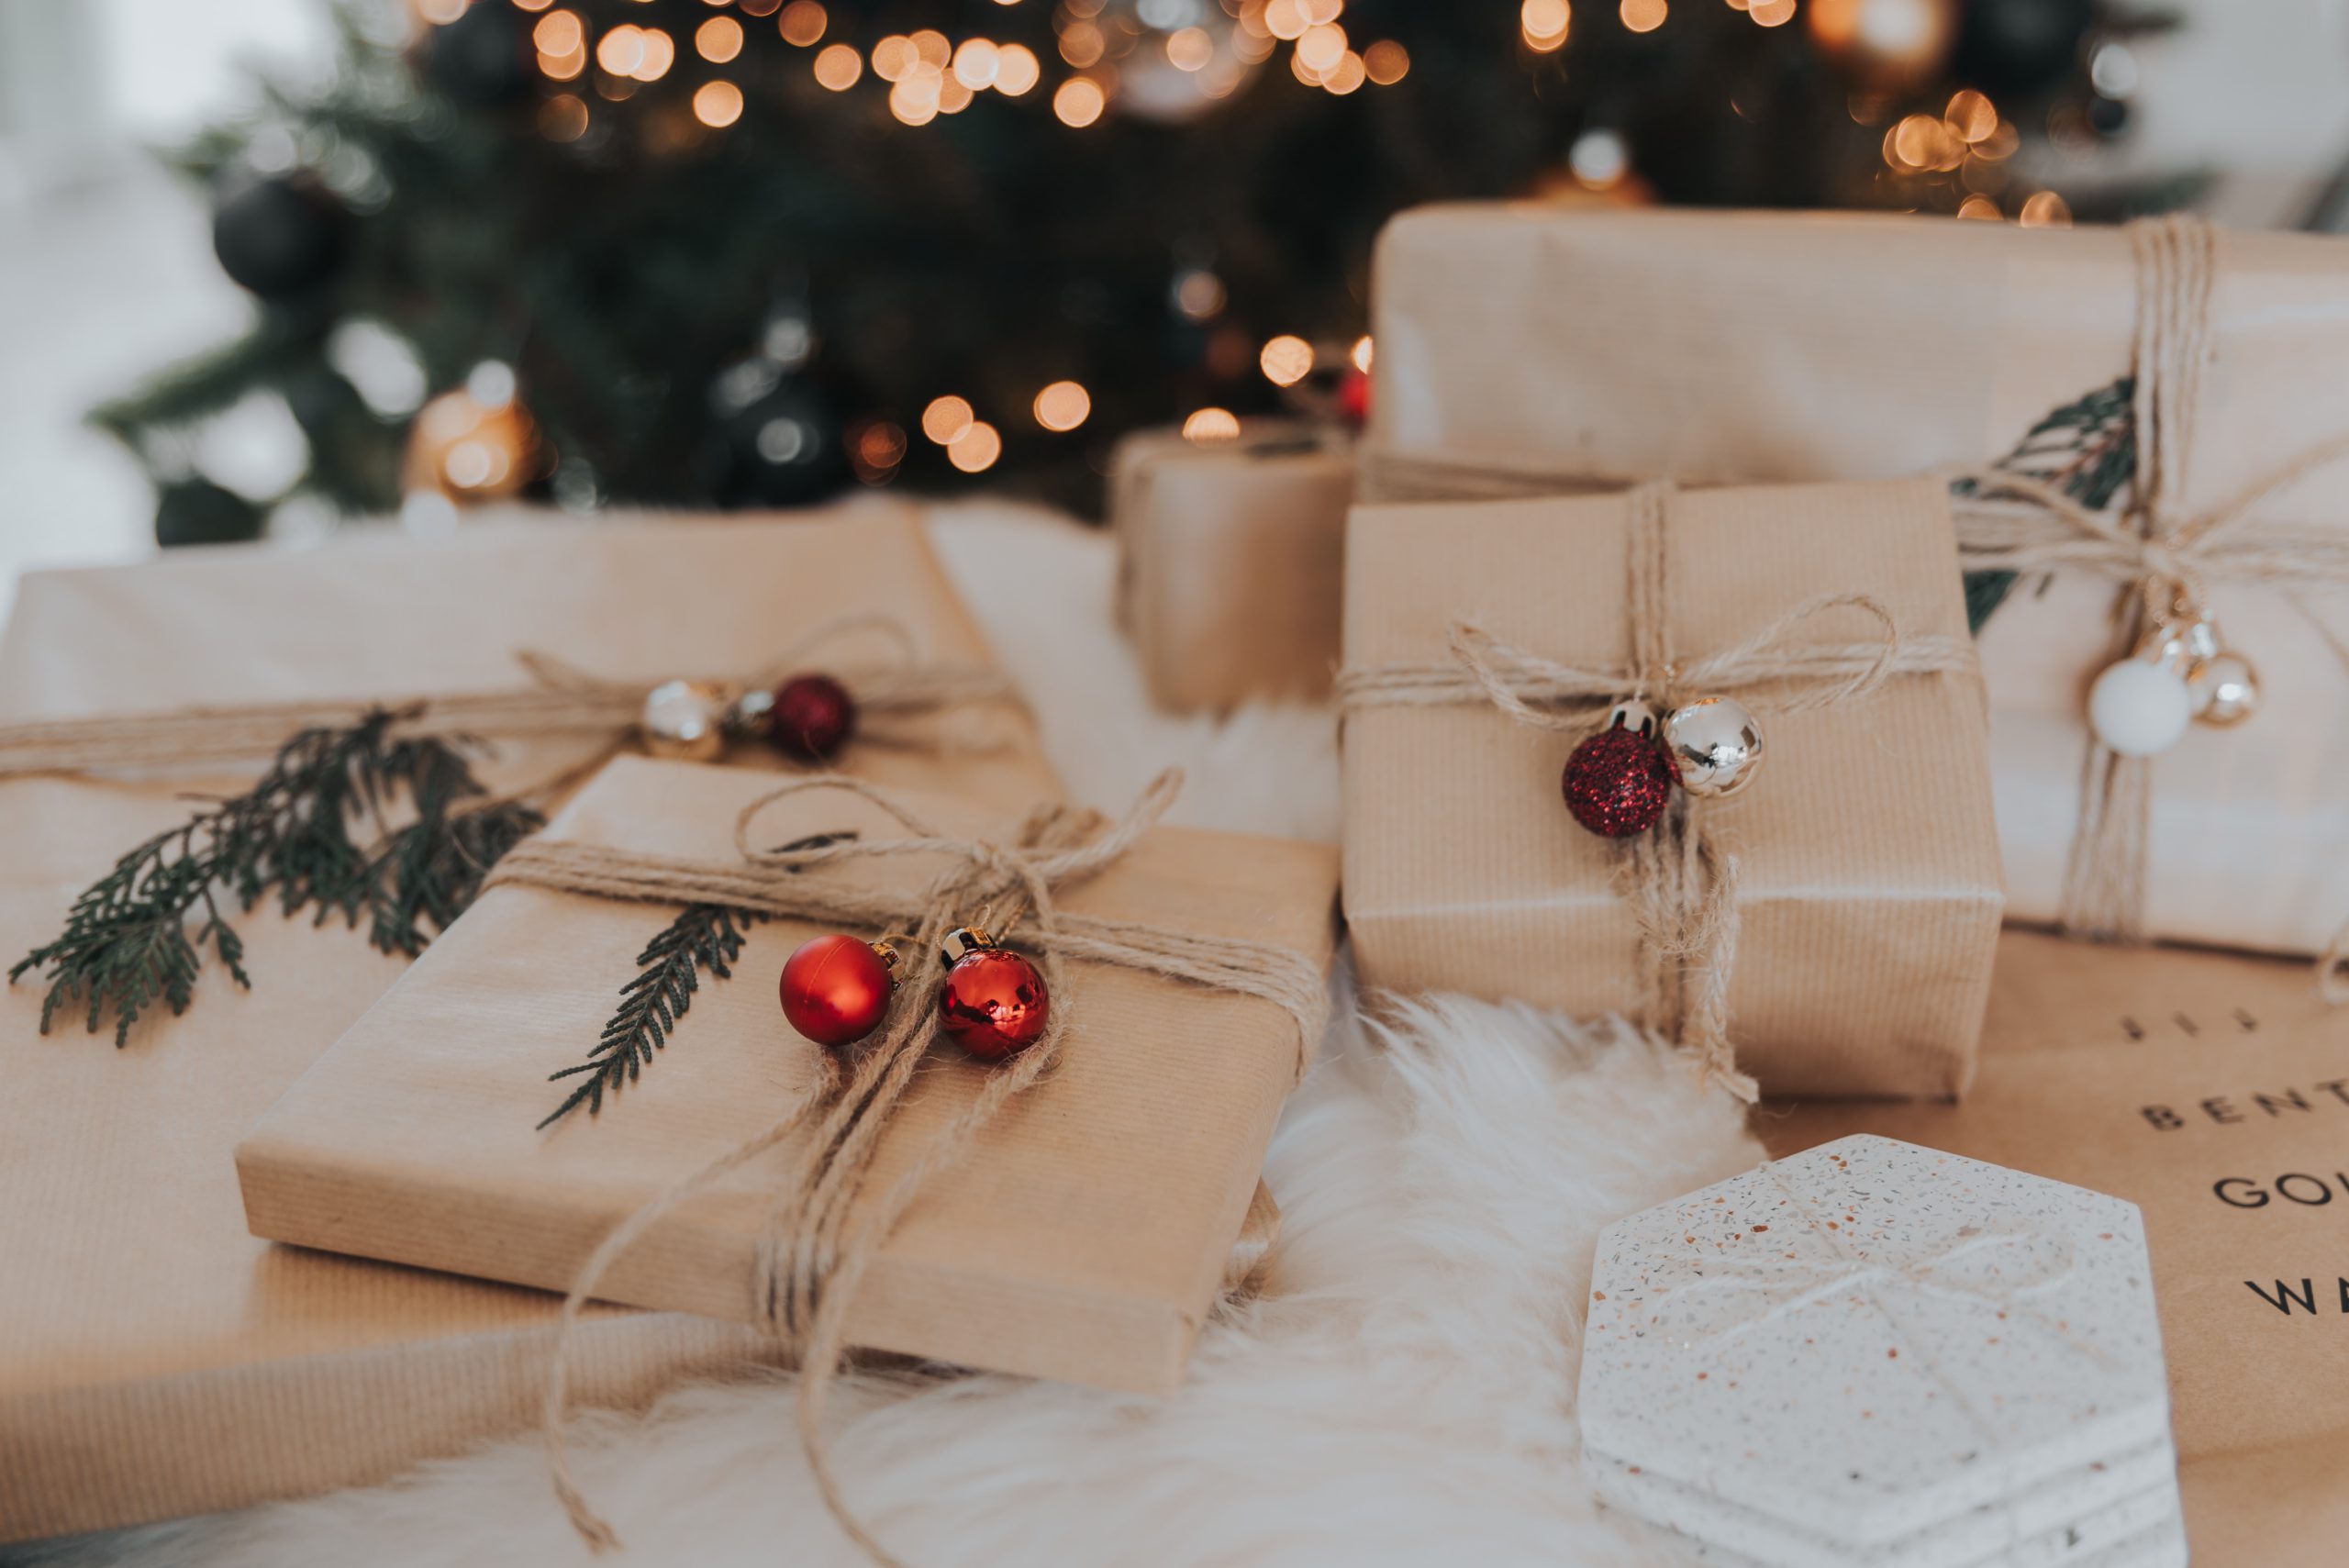 Christmas gifts under a tree | Photo by Lore Schodts on Unsplash